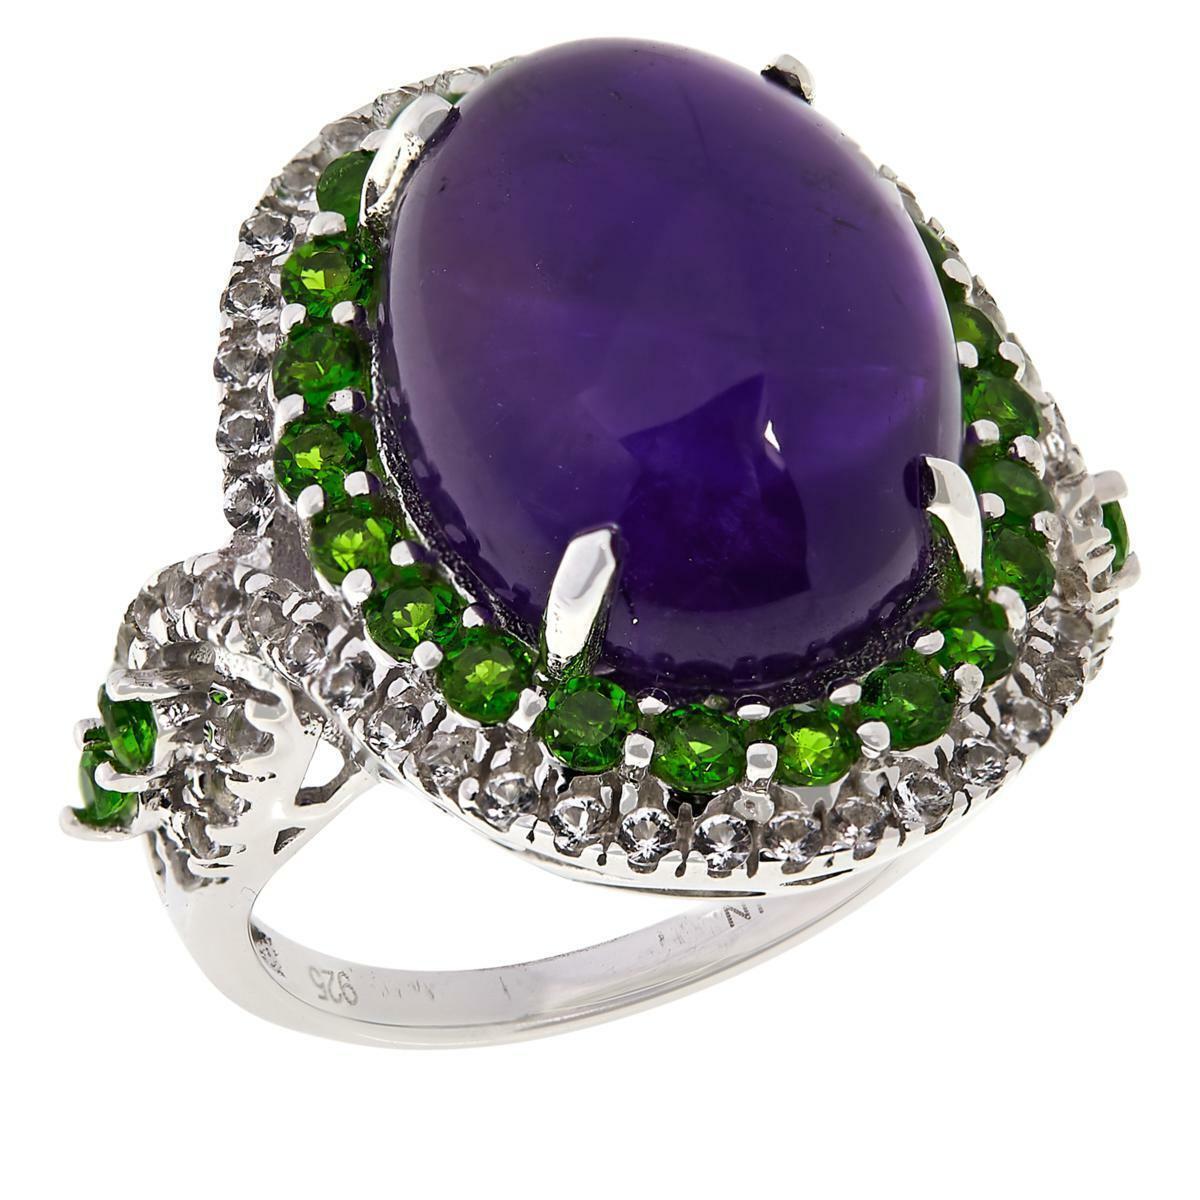 Colleen Lopez Amethyst, Chrome Diopside and White Topaz Ring, Size 5